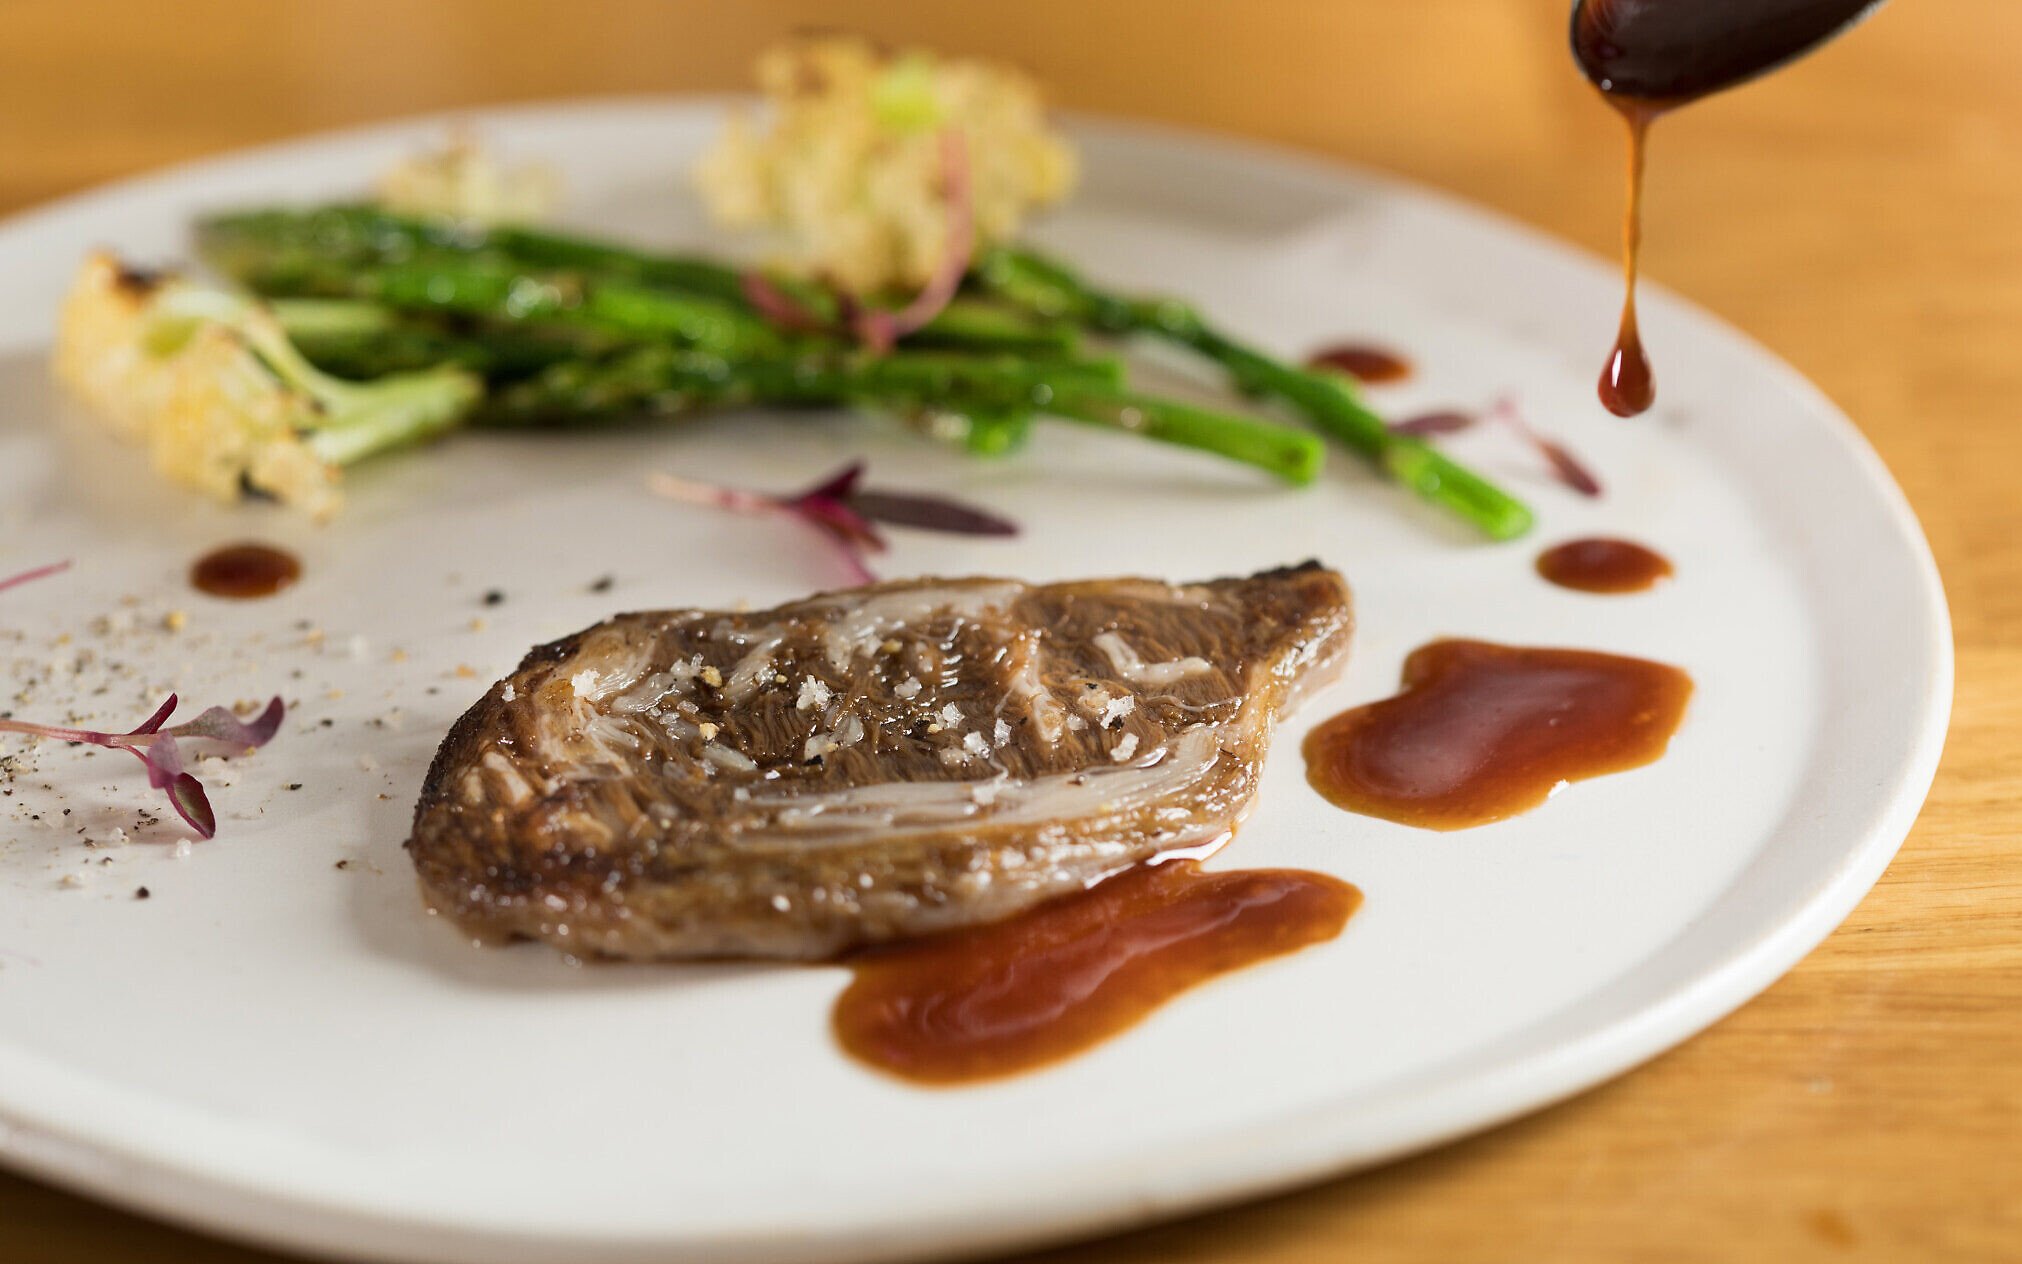 An Aleph Farms cell-based ribeye steak. (RNS/Courtesy of Aleph Farms and the Technion-Israel Institute of Technology)